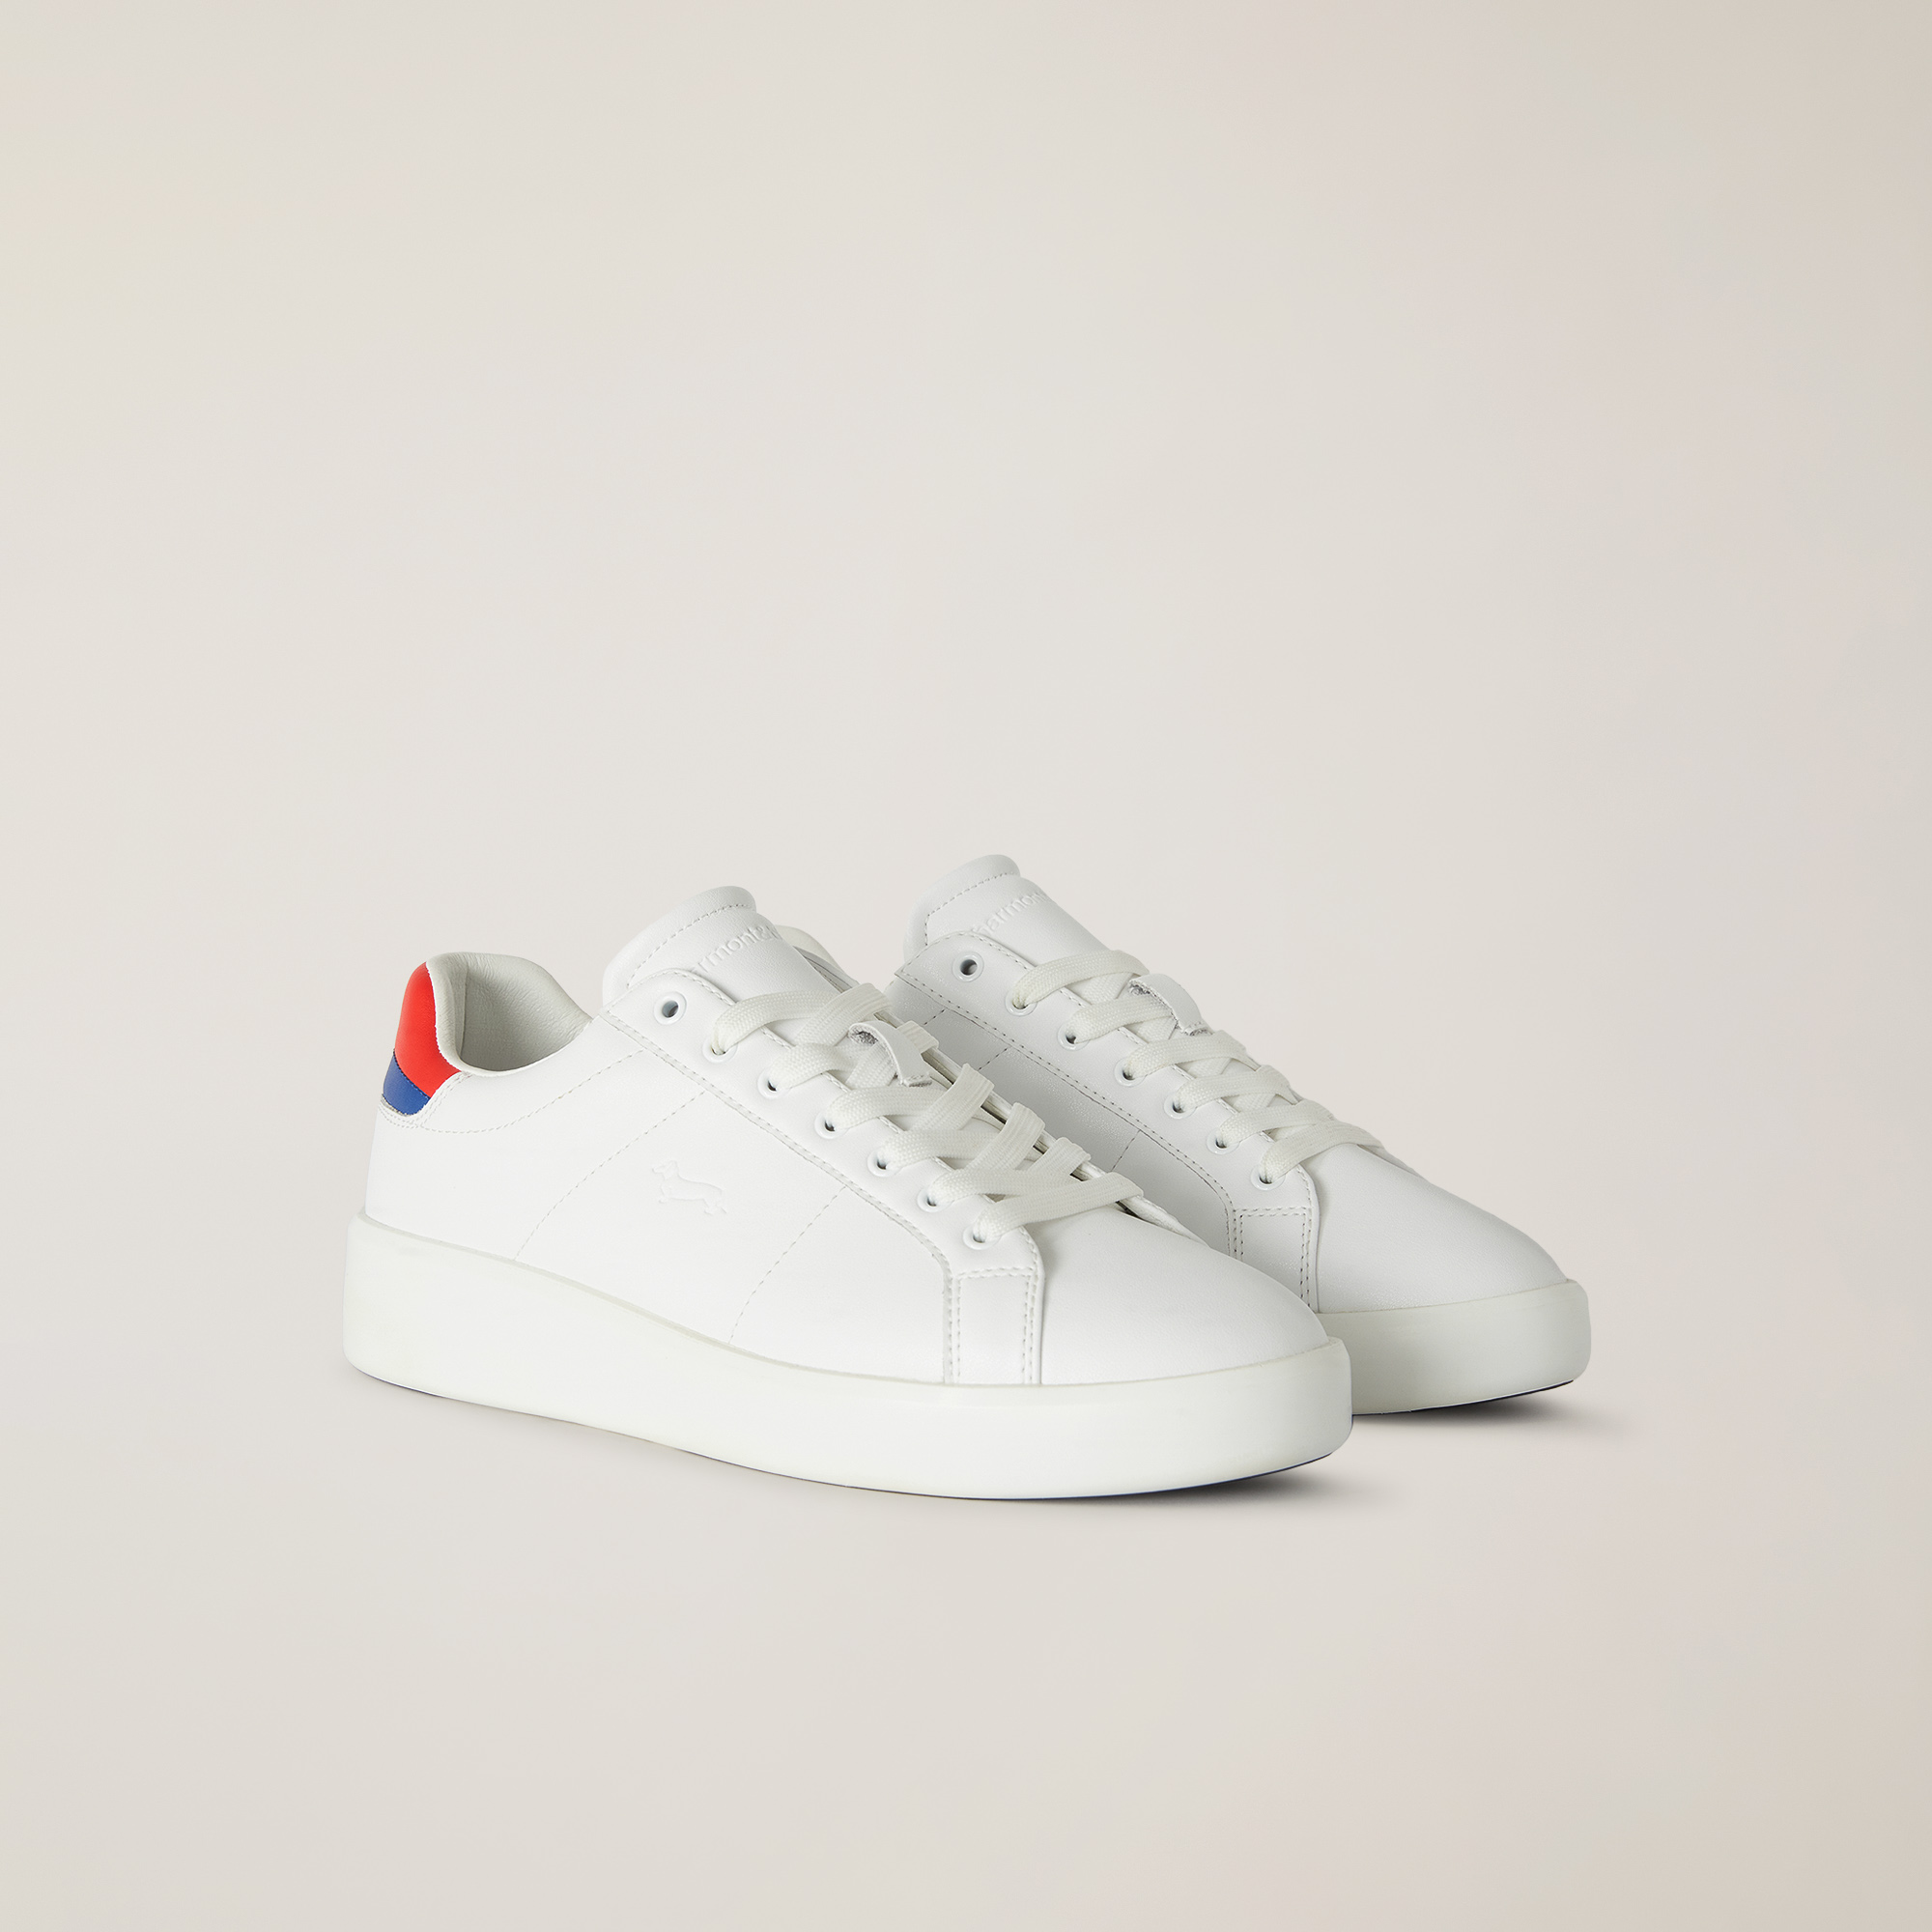 Sneaker with Oversize Sole, White/Red, large image number 1